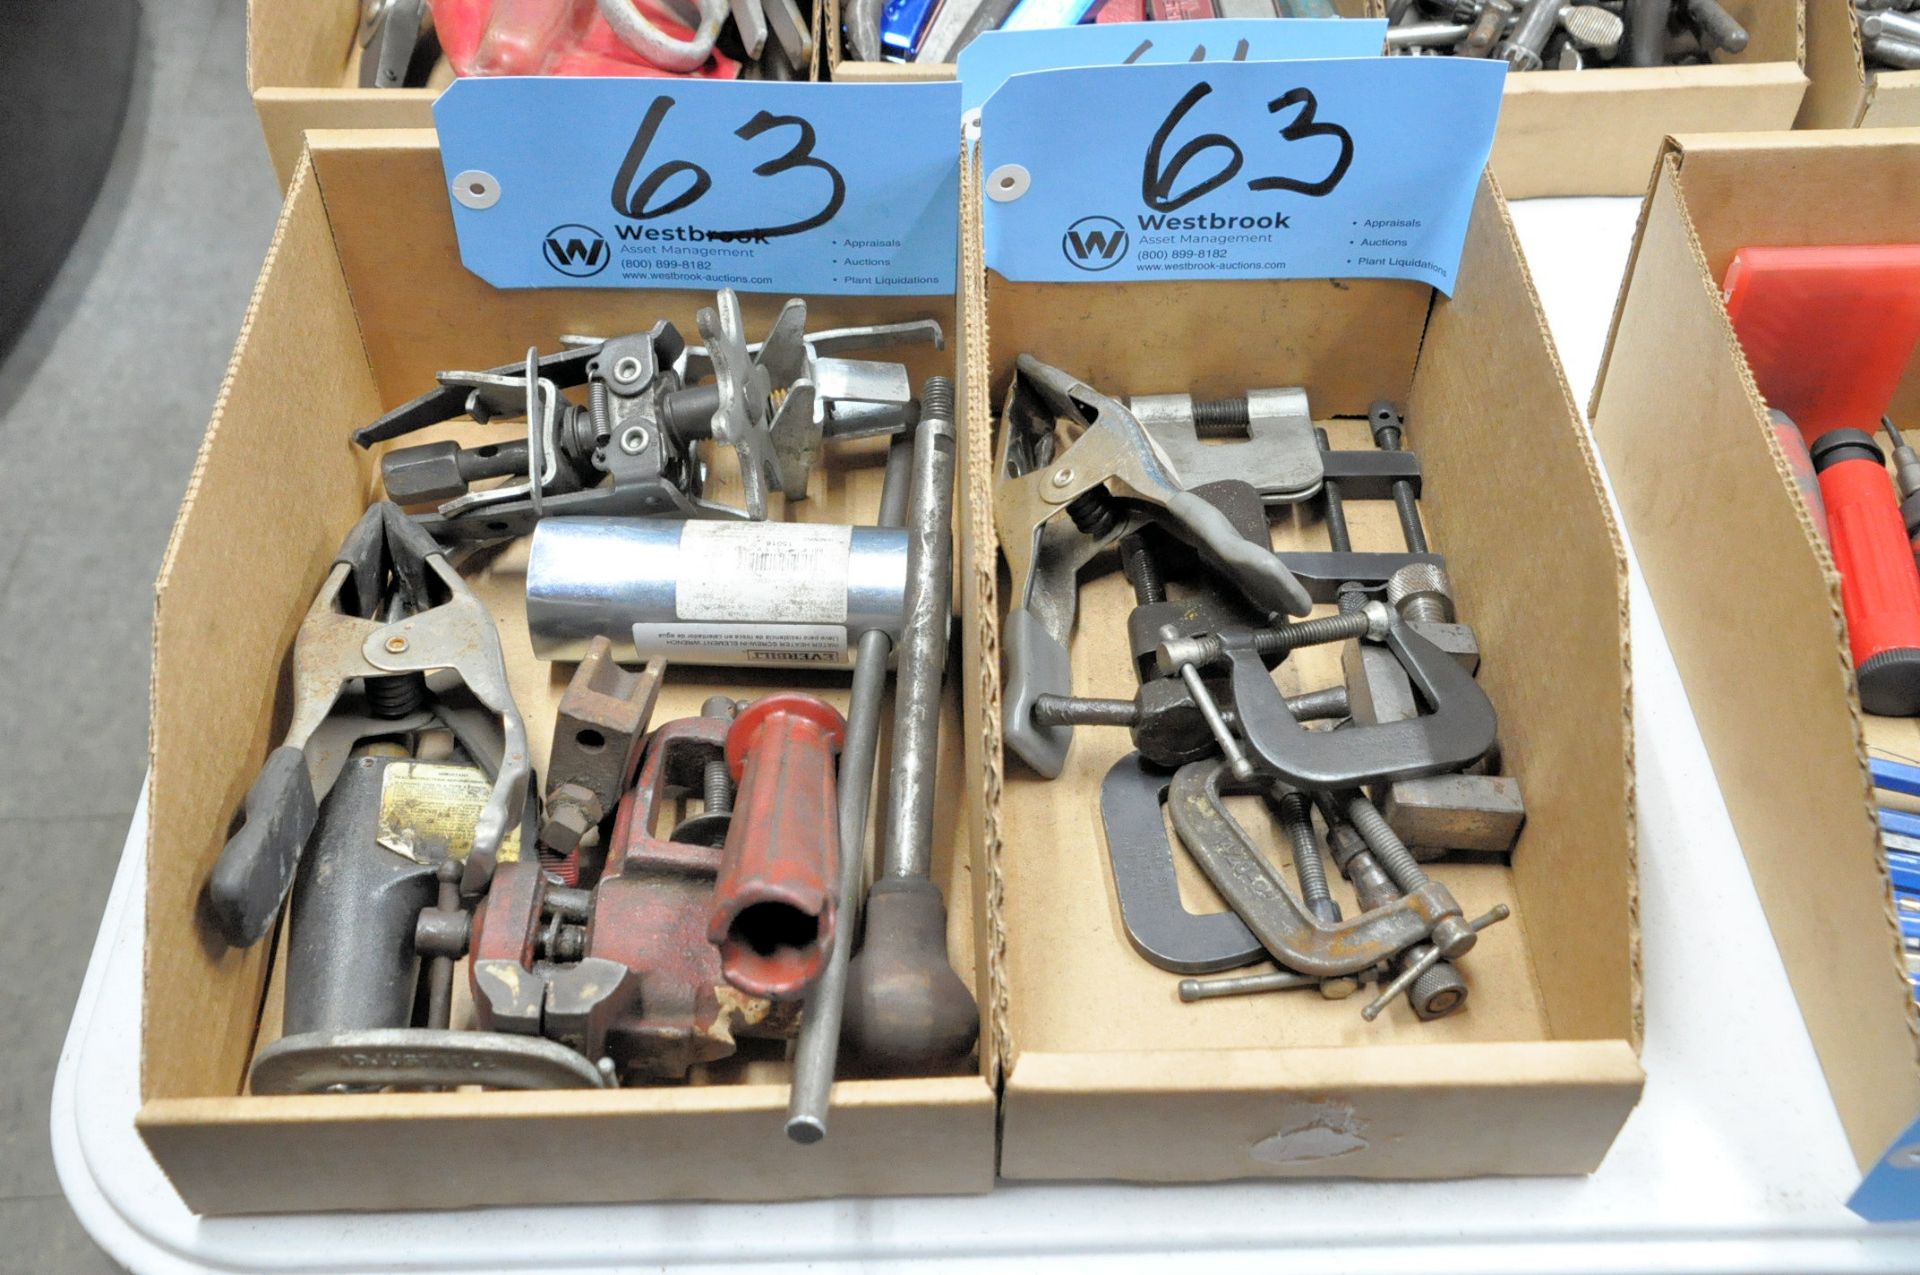 Lot-Various Clamps, Small Vise, Etc. in (2) Boxes